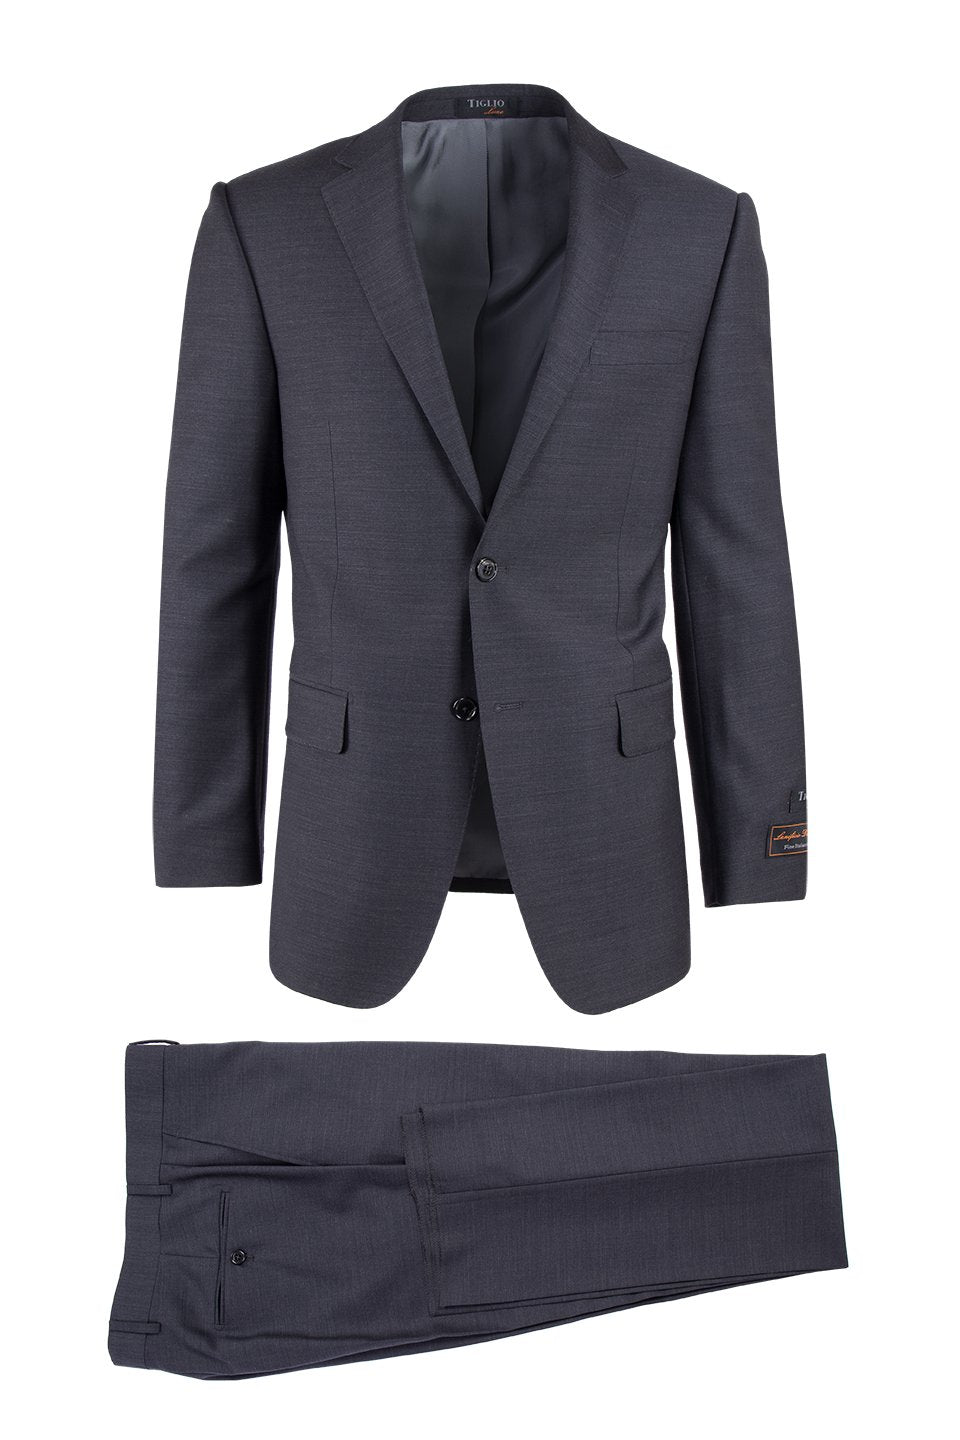 Novello Charcoal Gray, Modern Fit, Pure Wool Suit by Tiglio Luxe